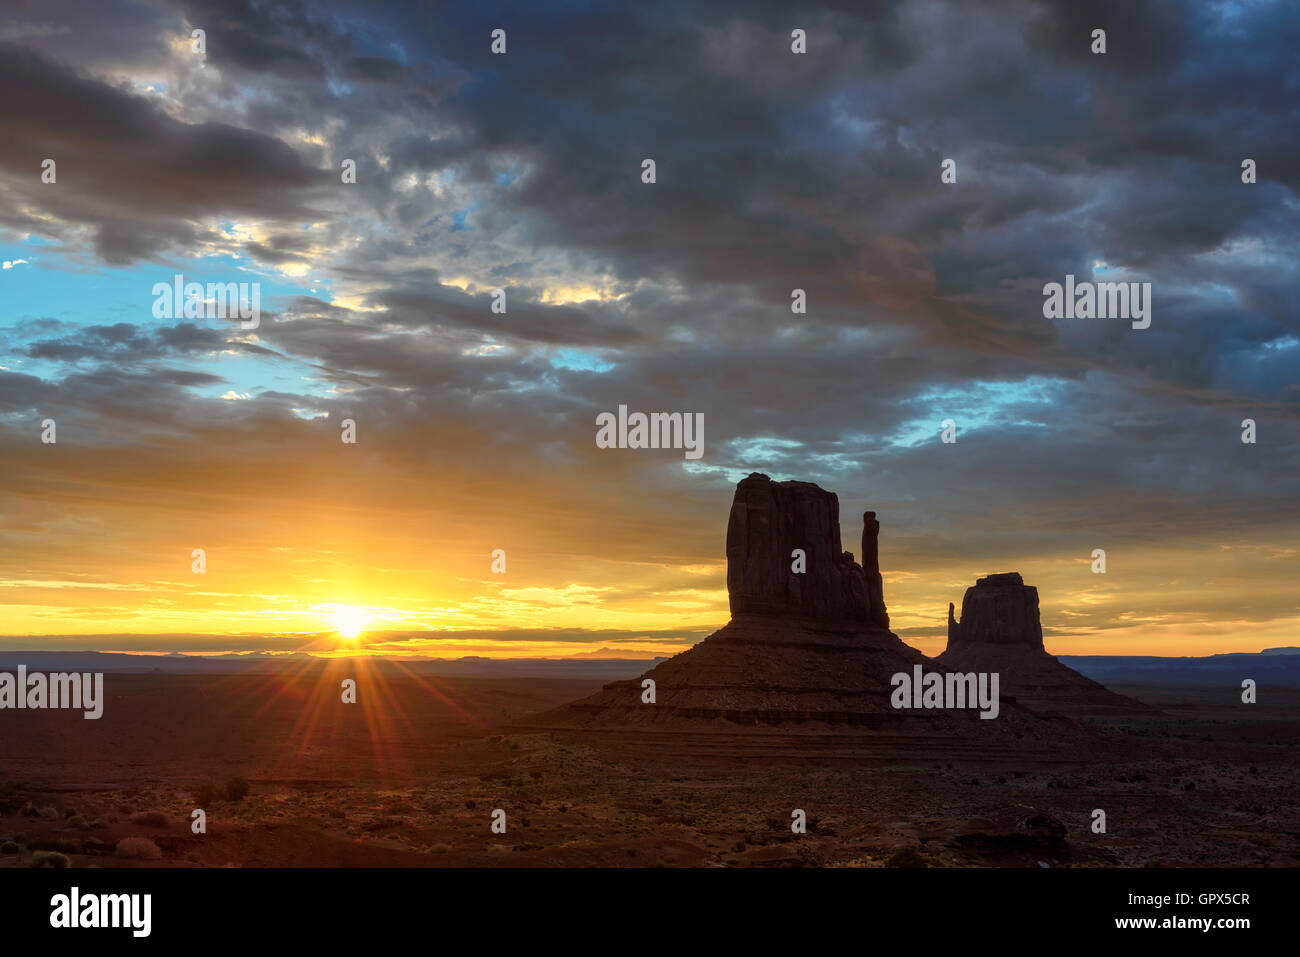 West Mitten Butte and East Mitten Butte at Sunrise in Monument Valley Navajo Tribal Park, Arizona, USA Stock Photo